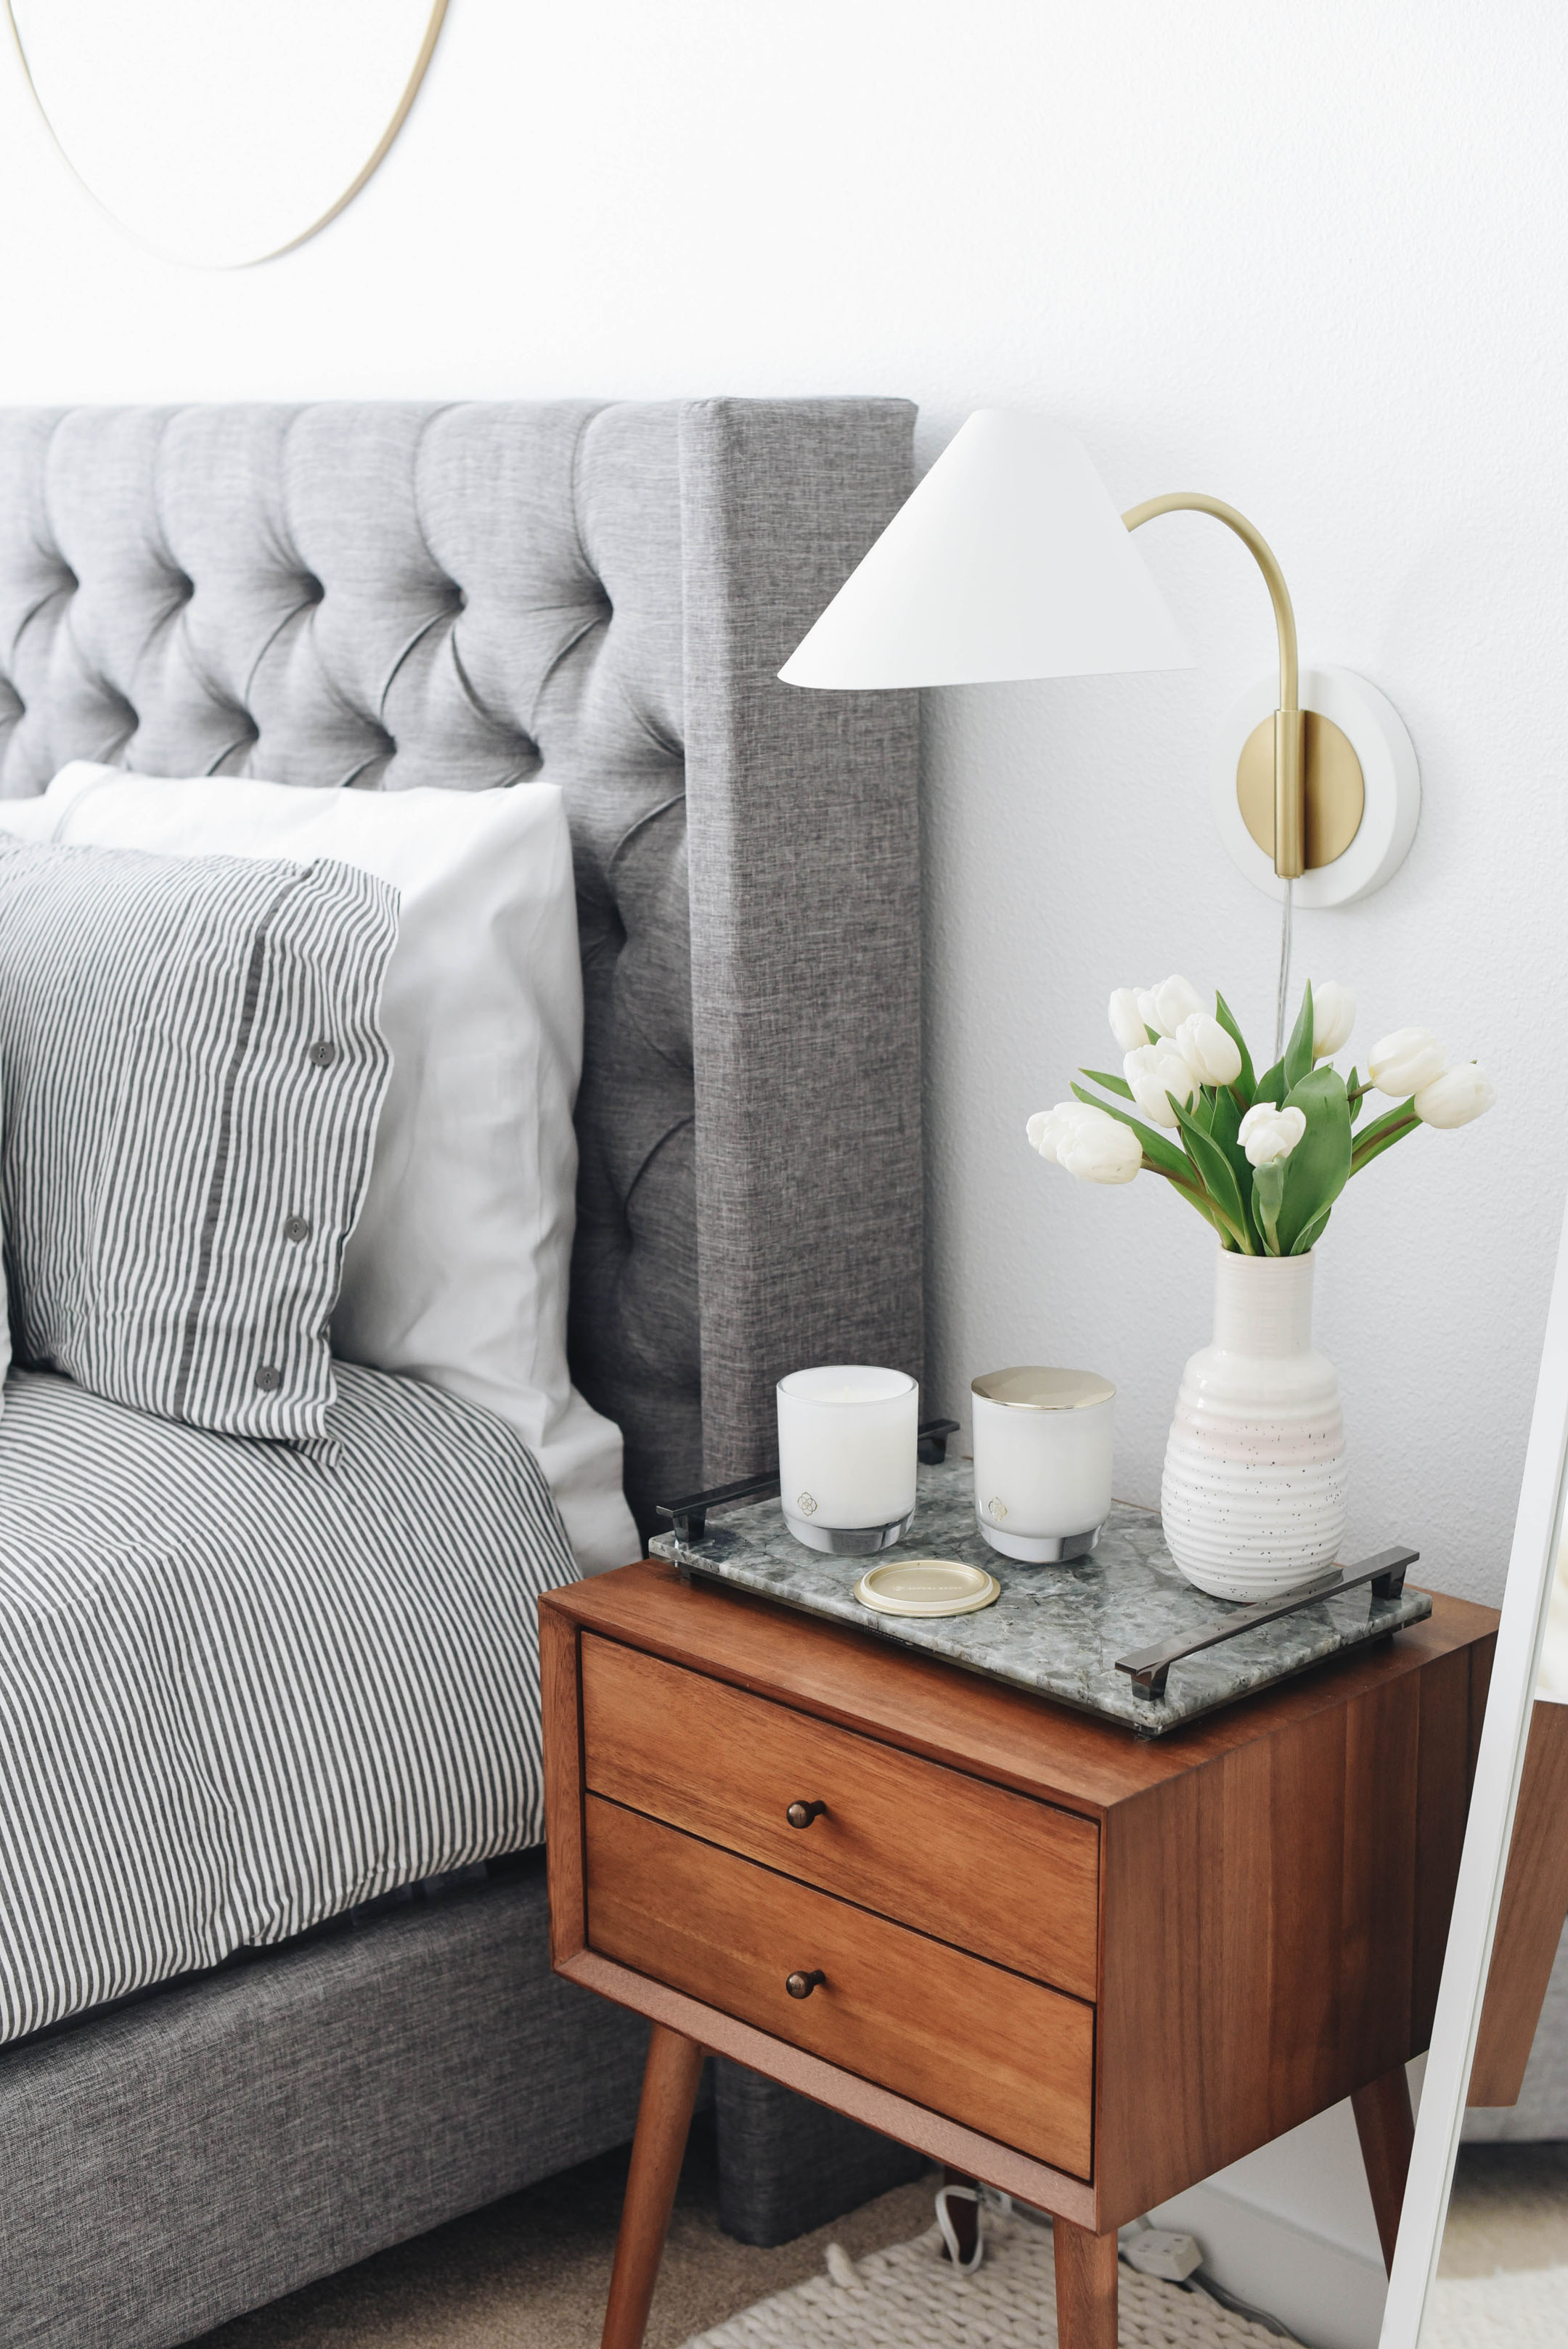 How to style a nightstand